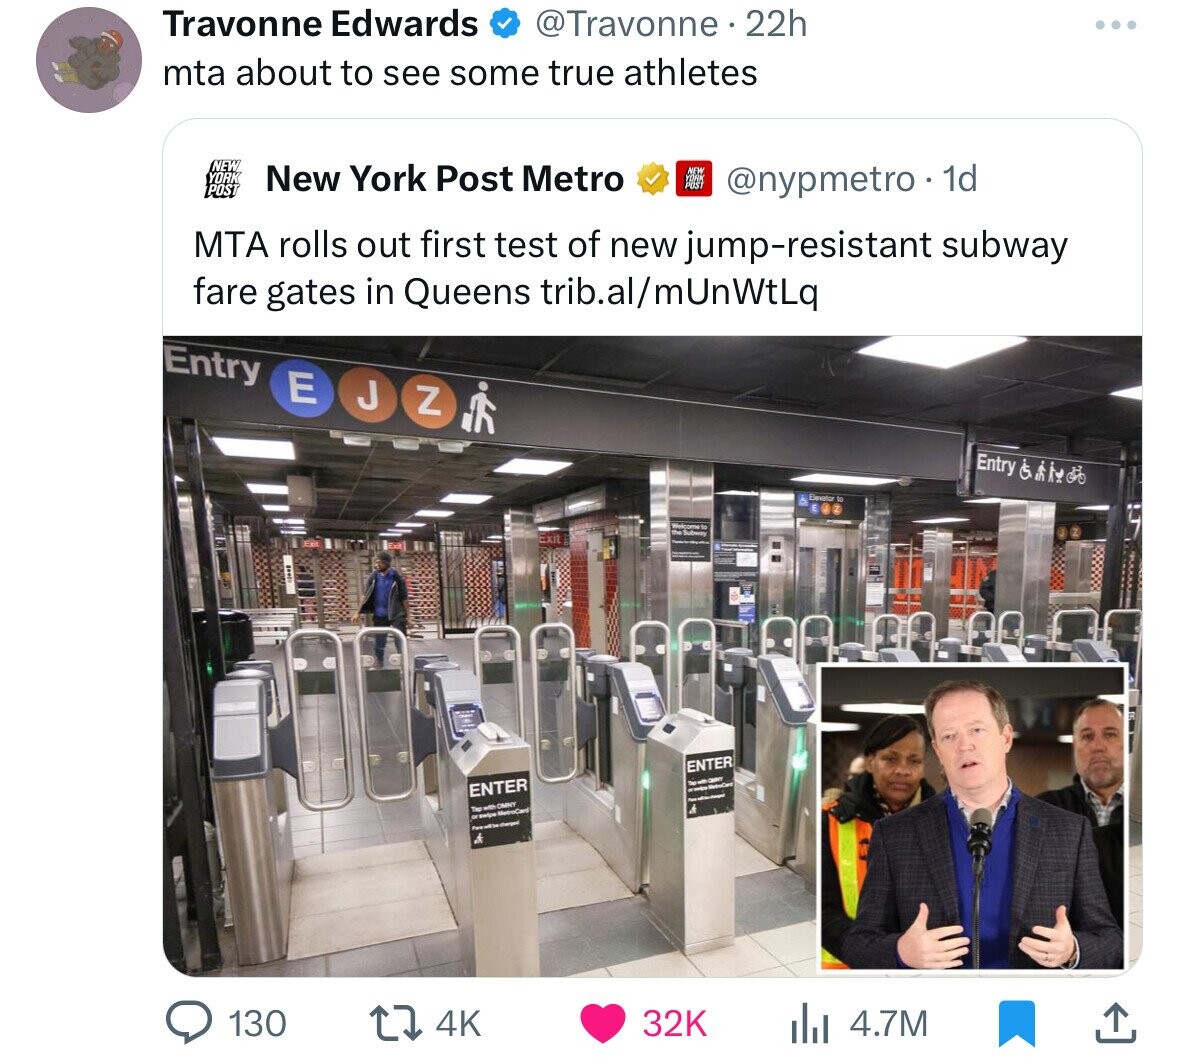 Travonne Edwards 22h mta about to see some true athletes 1d Mta rolls out first test of new jumpresistant subway fare gates in Queens trib.almUnWtLq Entry Ejza New York New York Post Metro Post 130 Enter Thp with Omny or wipe MetroCard Falleged 4K New…